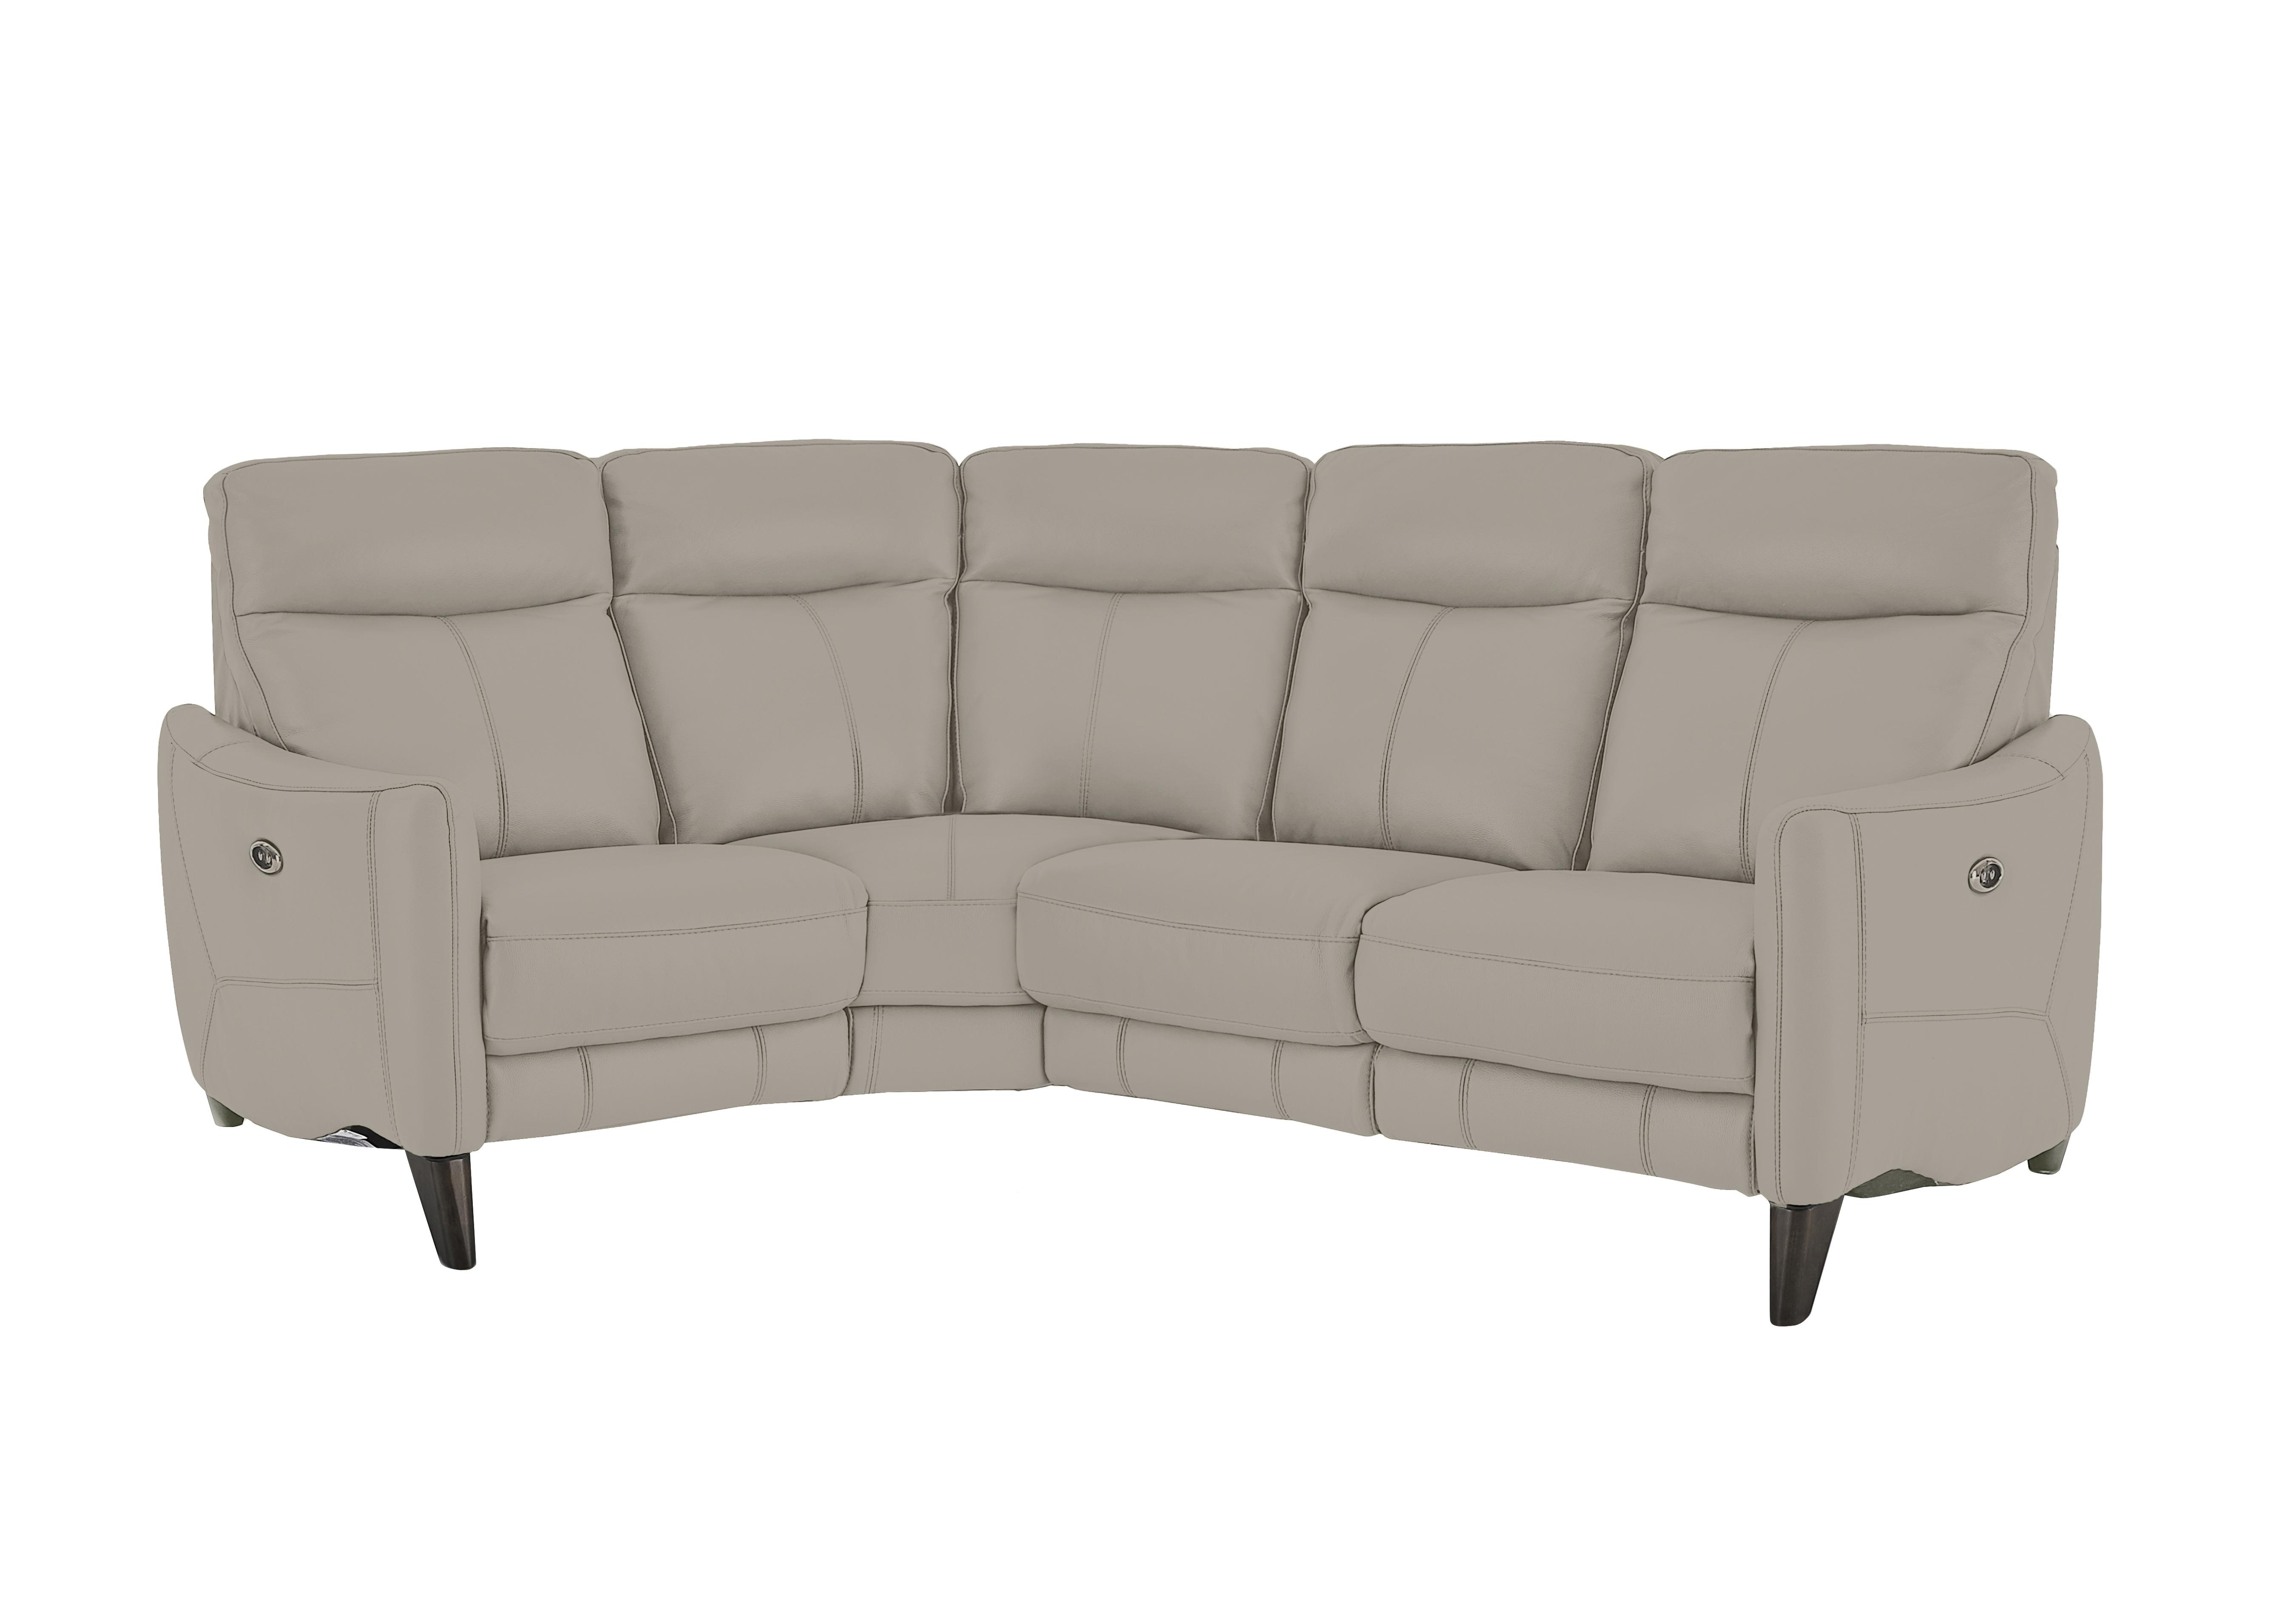 Compact Collection Petit Leather Corner Sofa in Bv-946b Silver Grey on Furniture Village